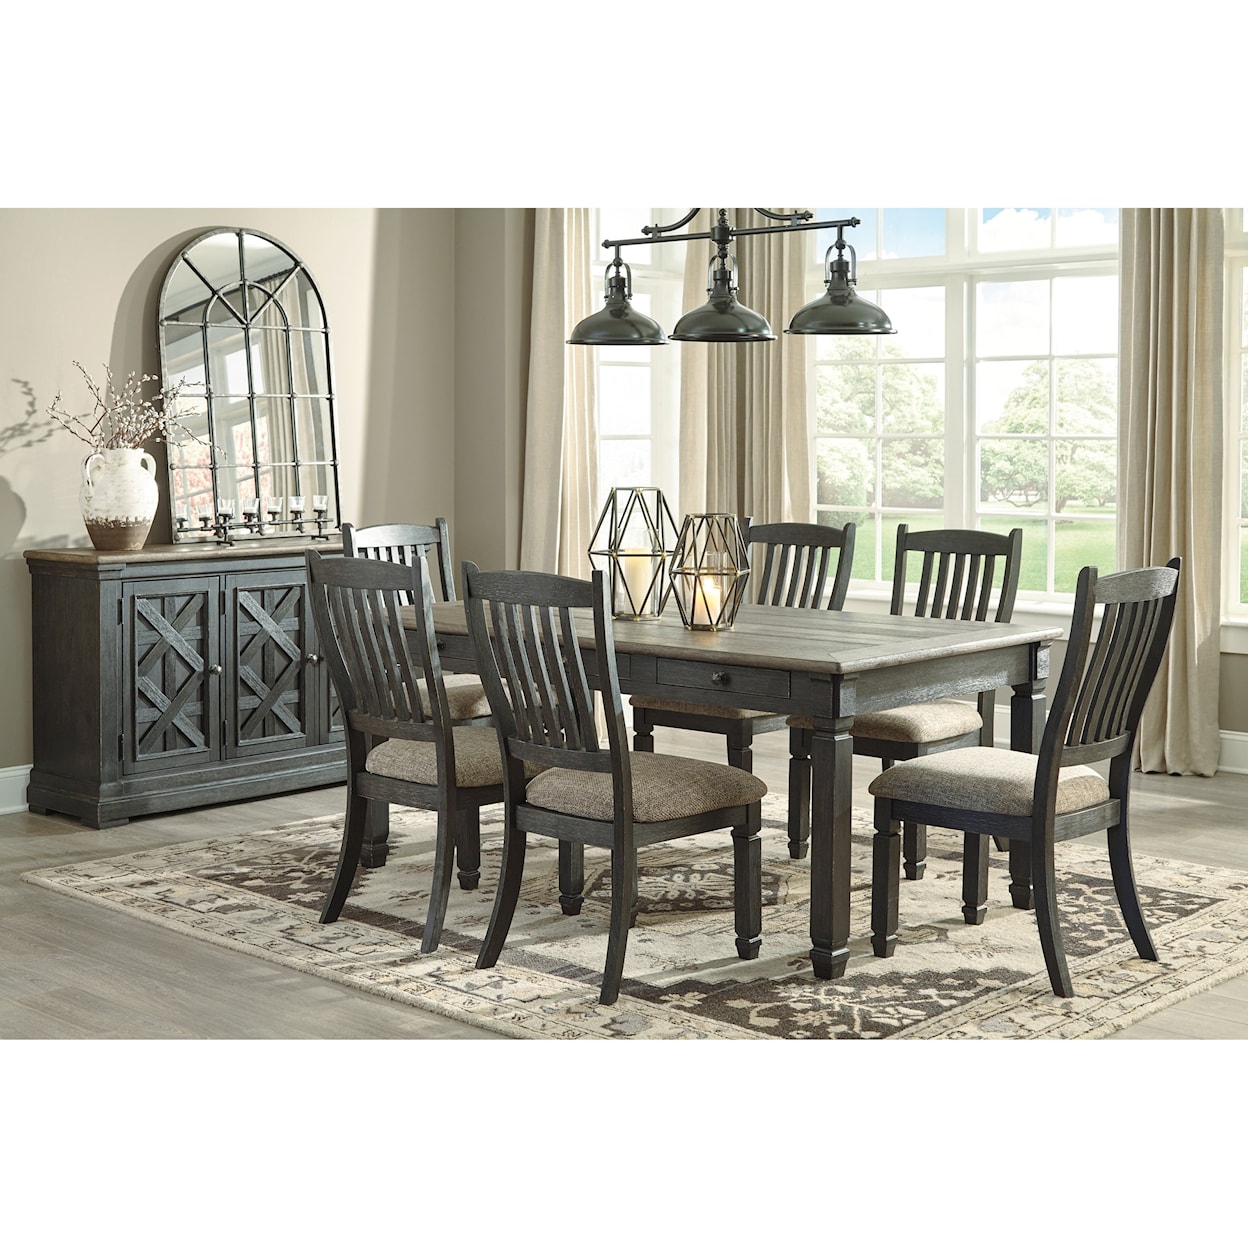 Signature Design by Ashley Tyler Creek Formal Dining Room Group